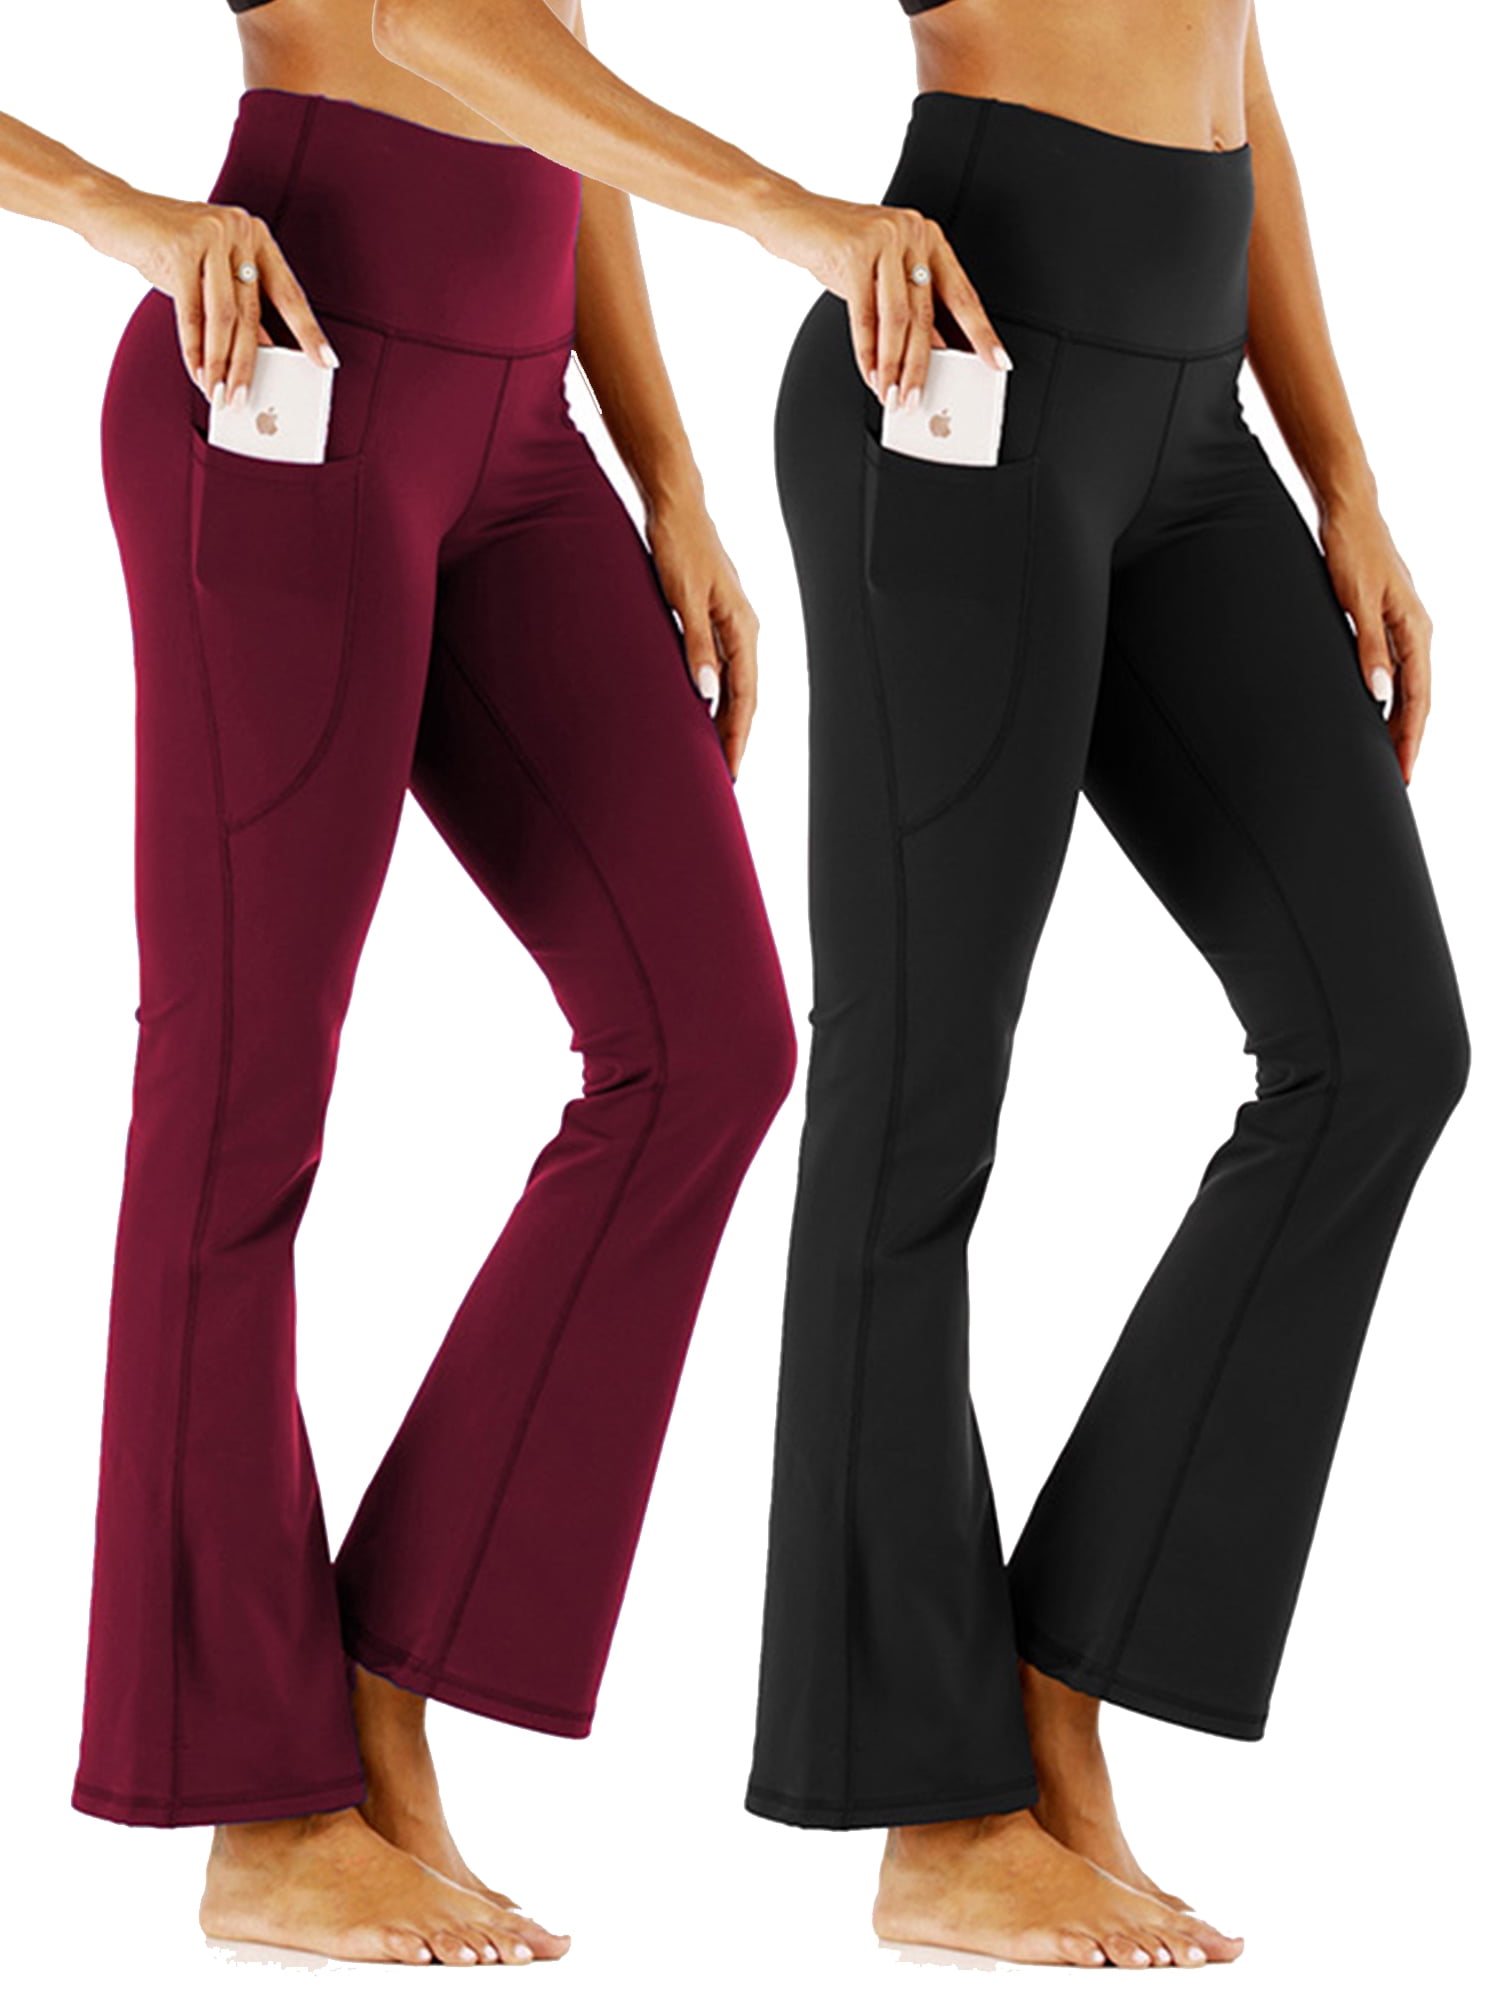  PHISOCKAT 2 Pack High Waist Yoga Pants with Pockets